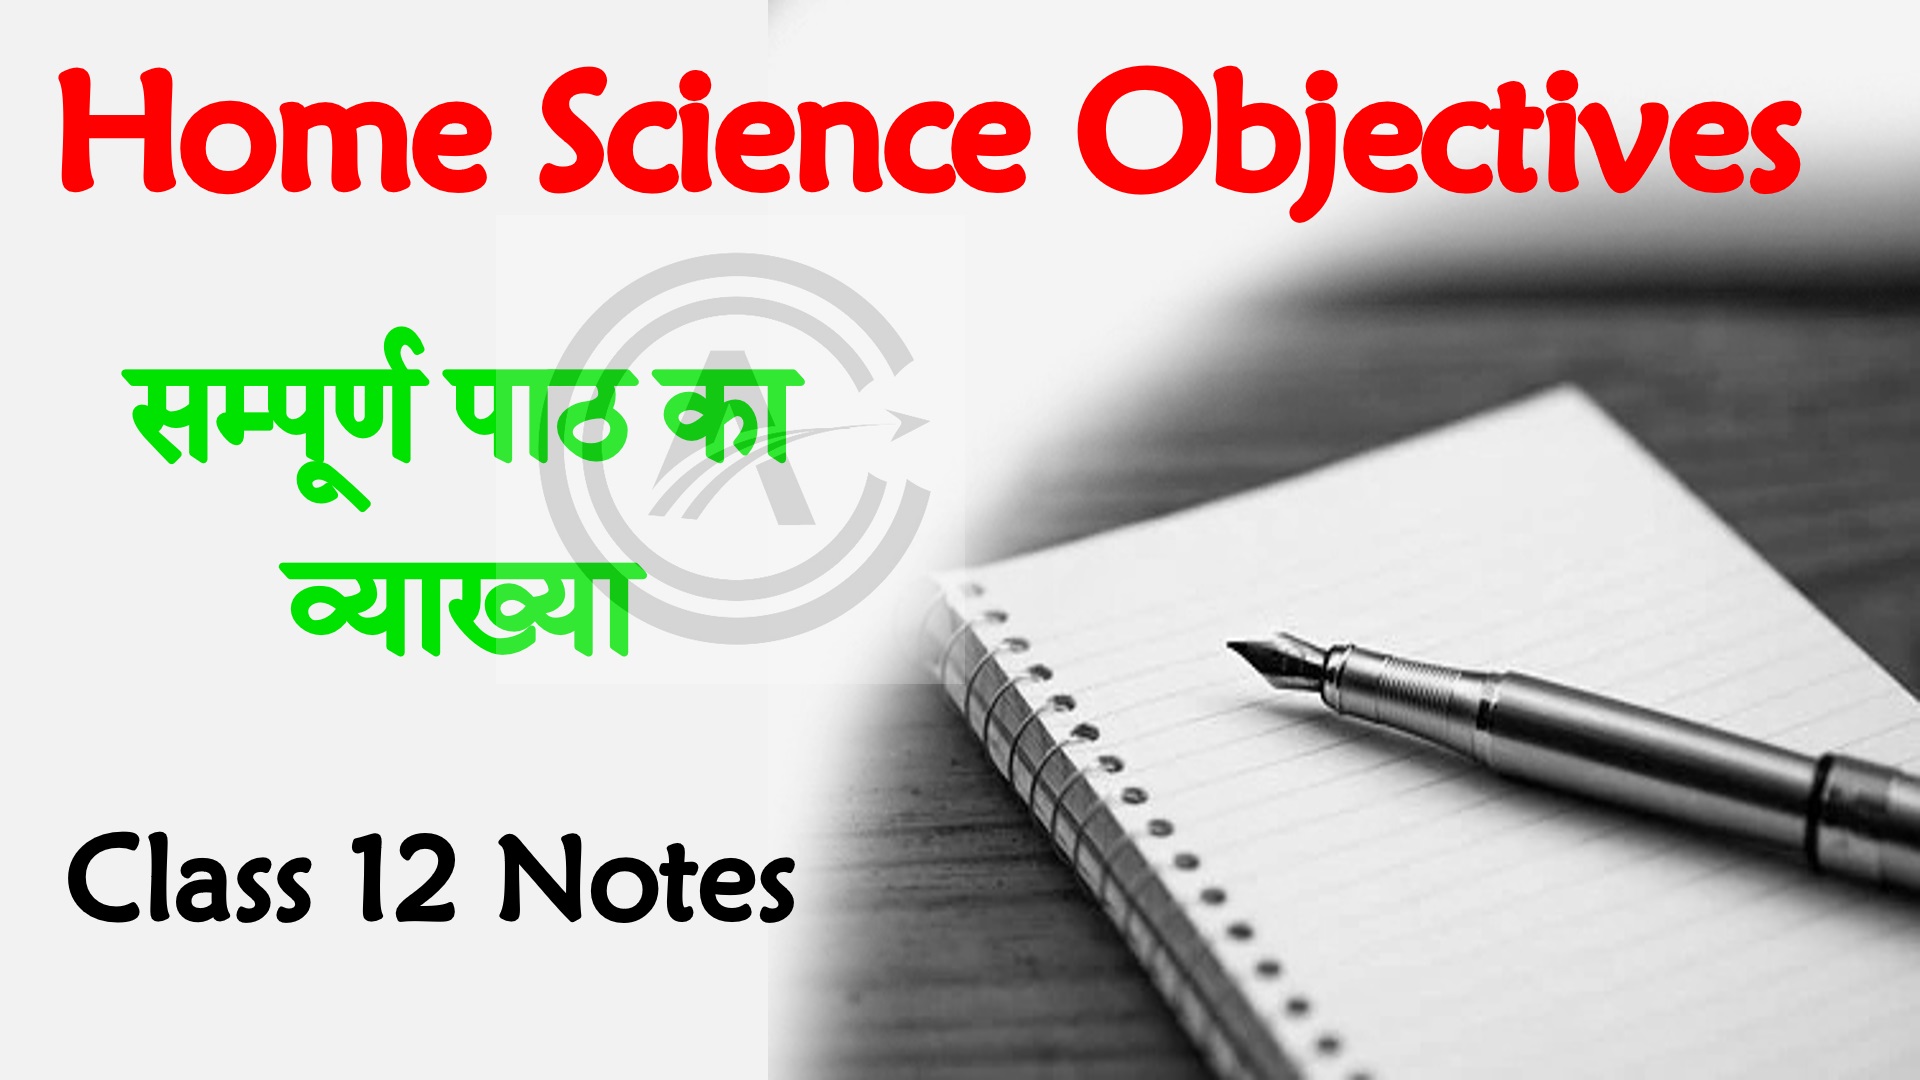 Bihar Board Class 12th Home Science Objective Questions